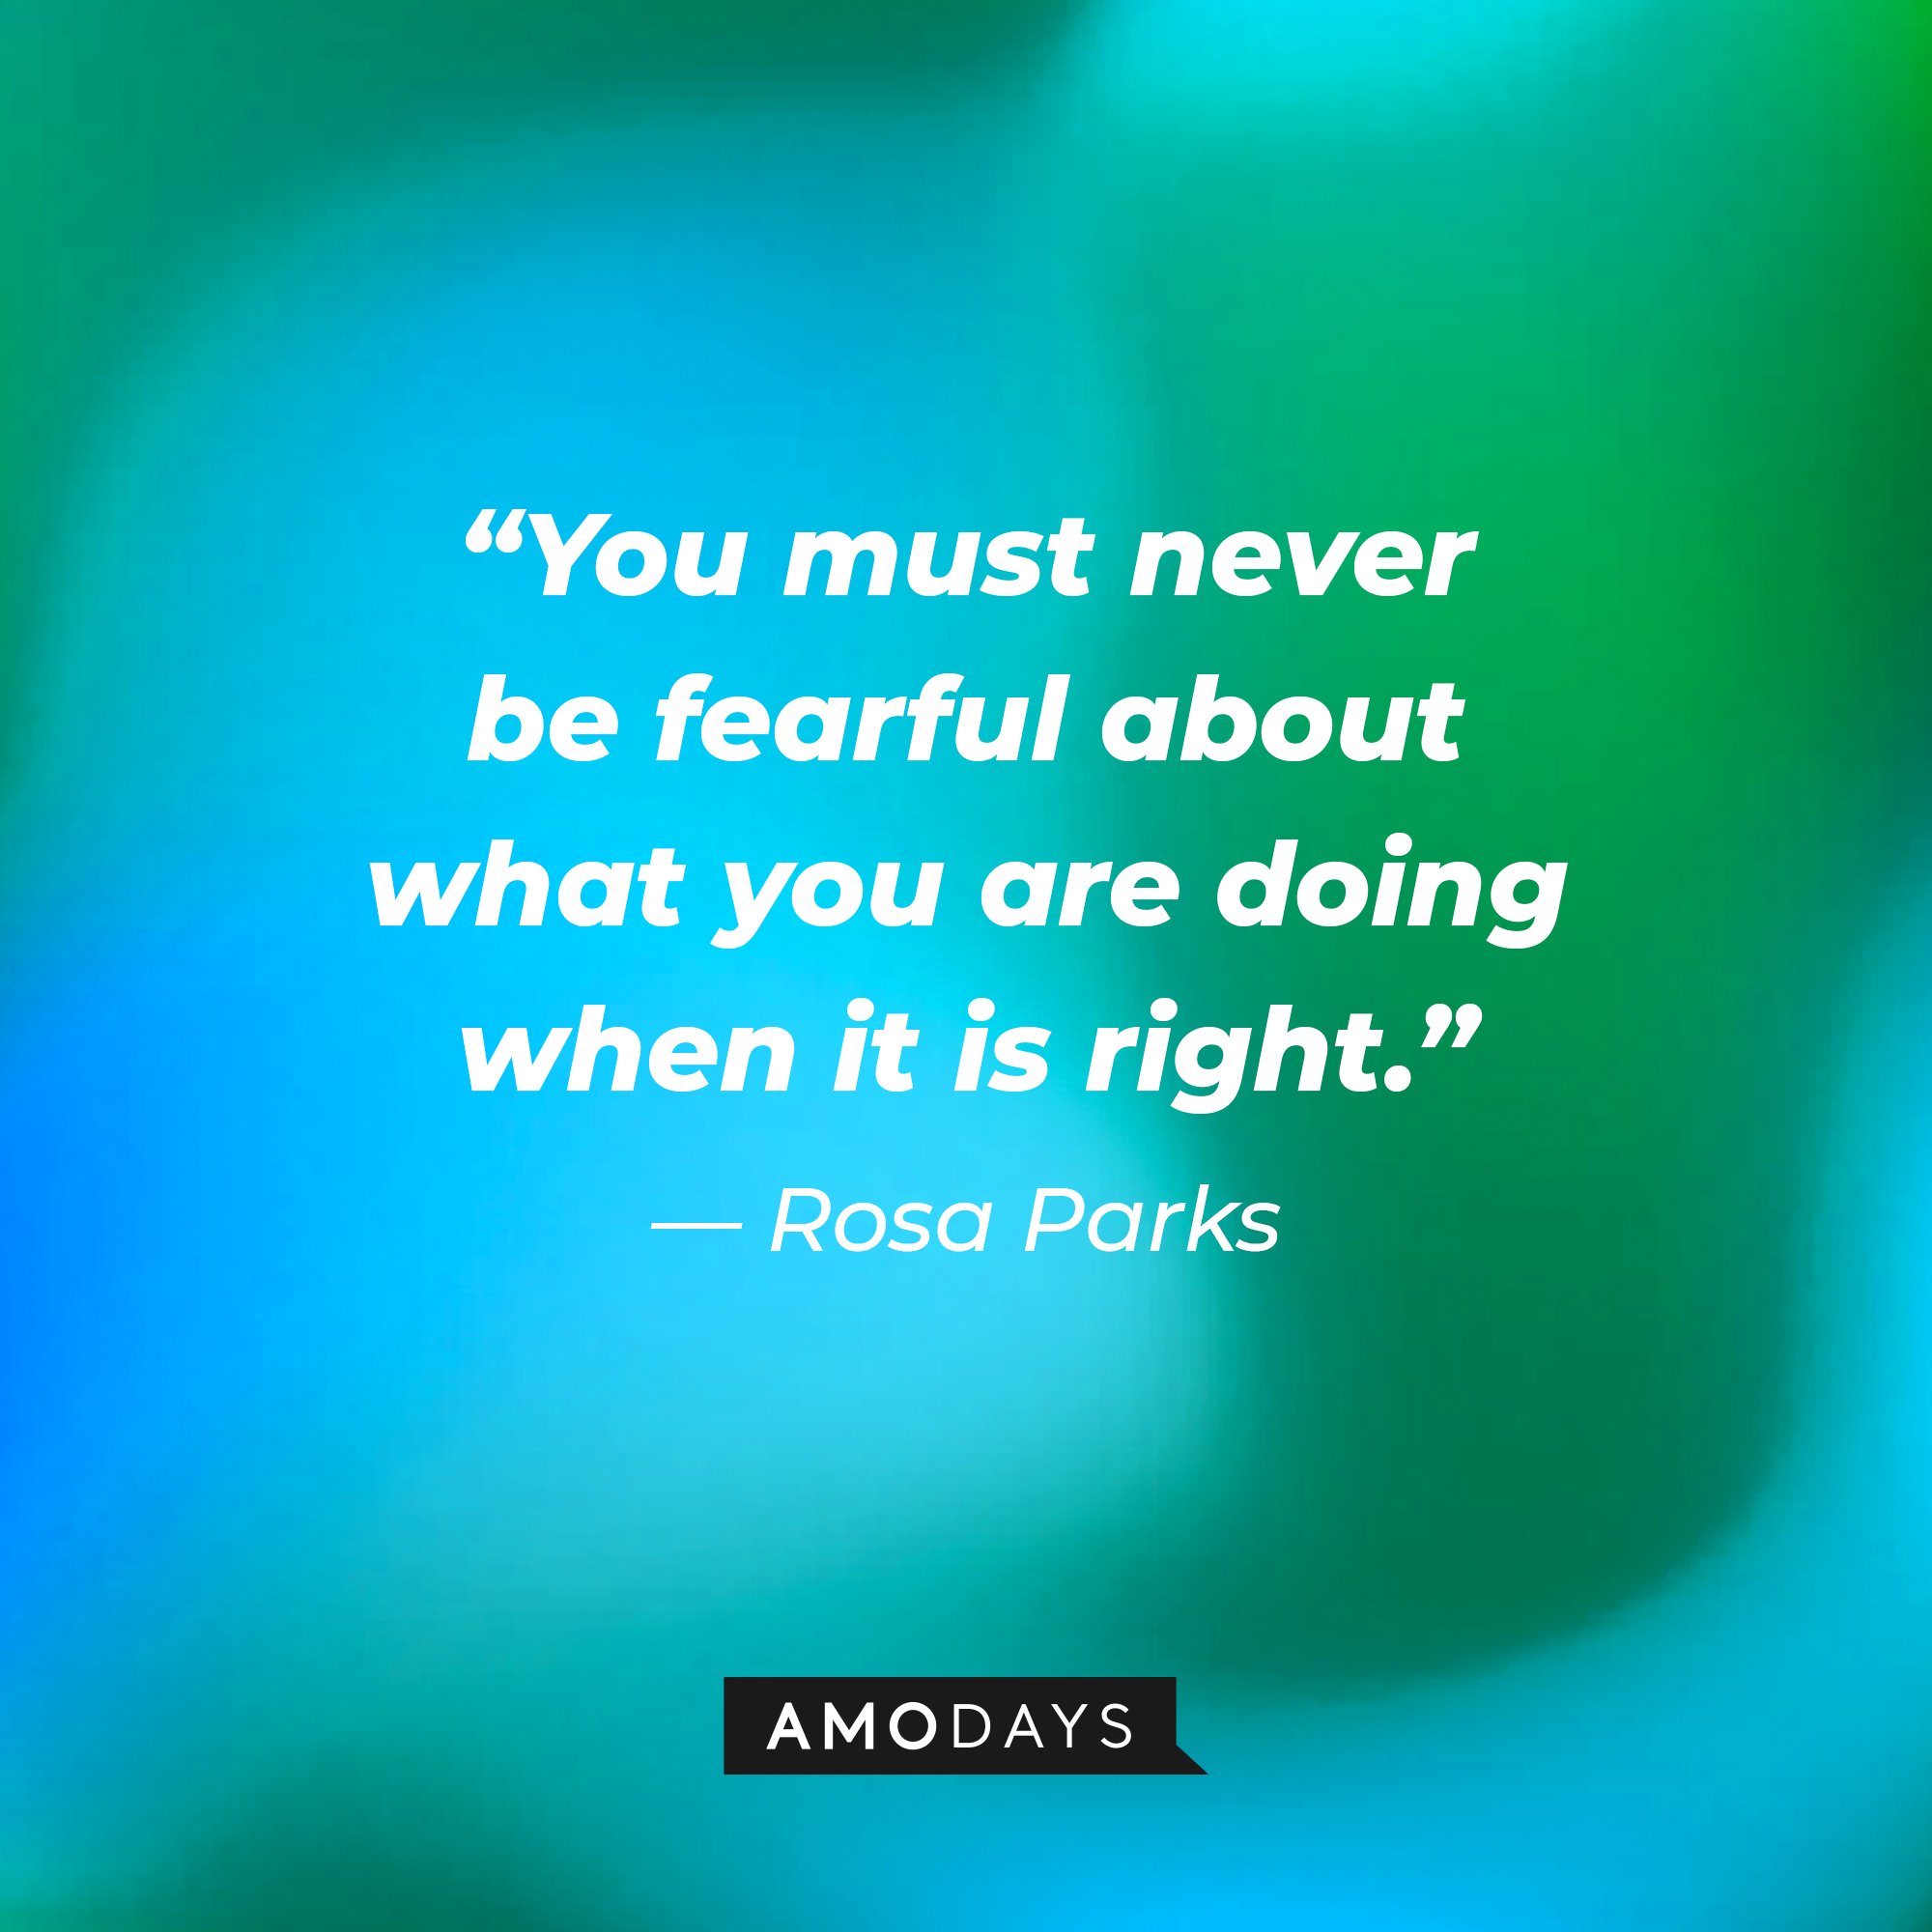 Rosa Parks’ quote: "You must never be fearful about what you are doing when it is right." | Image: AmoDays